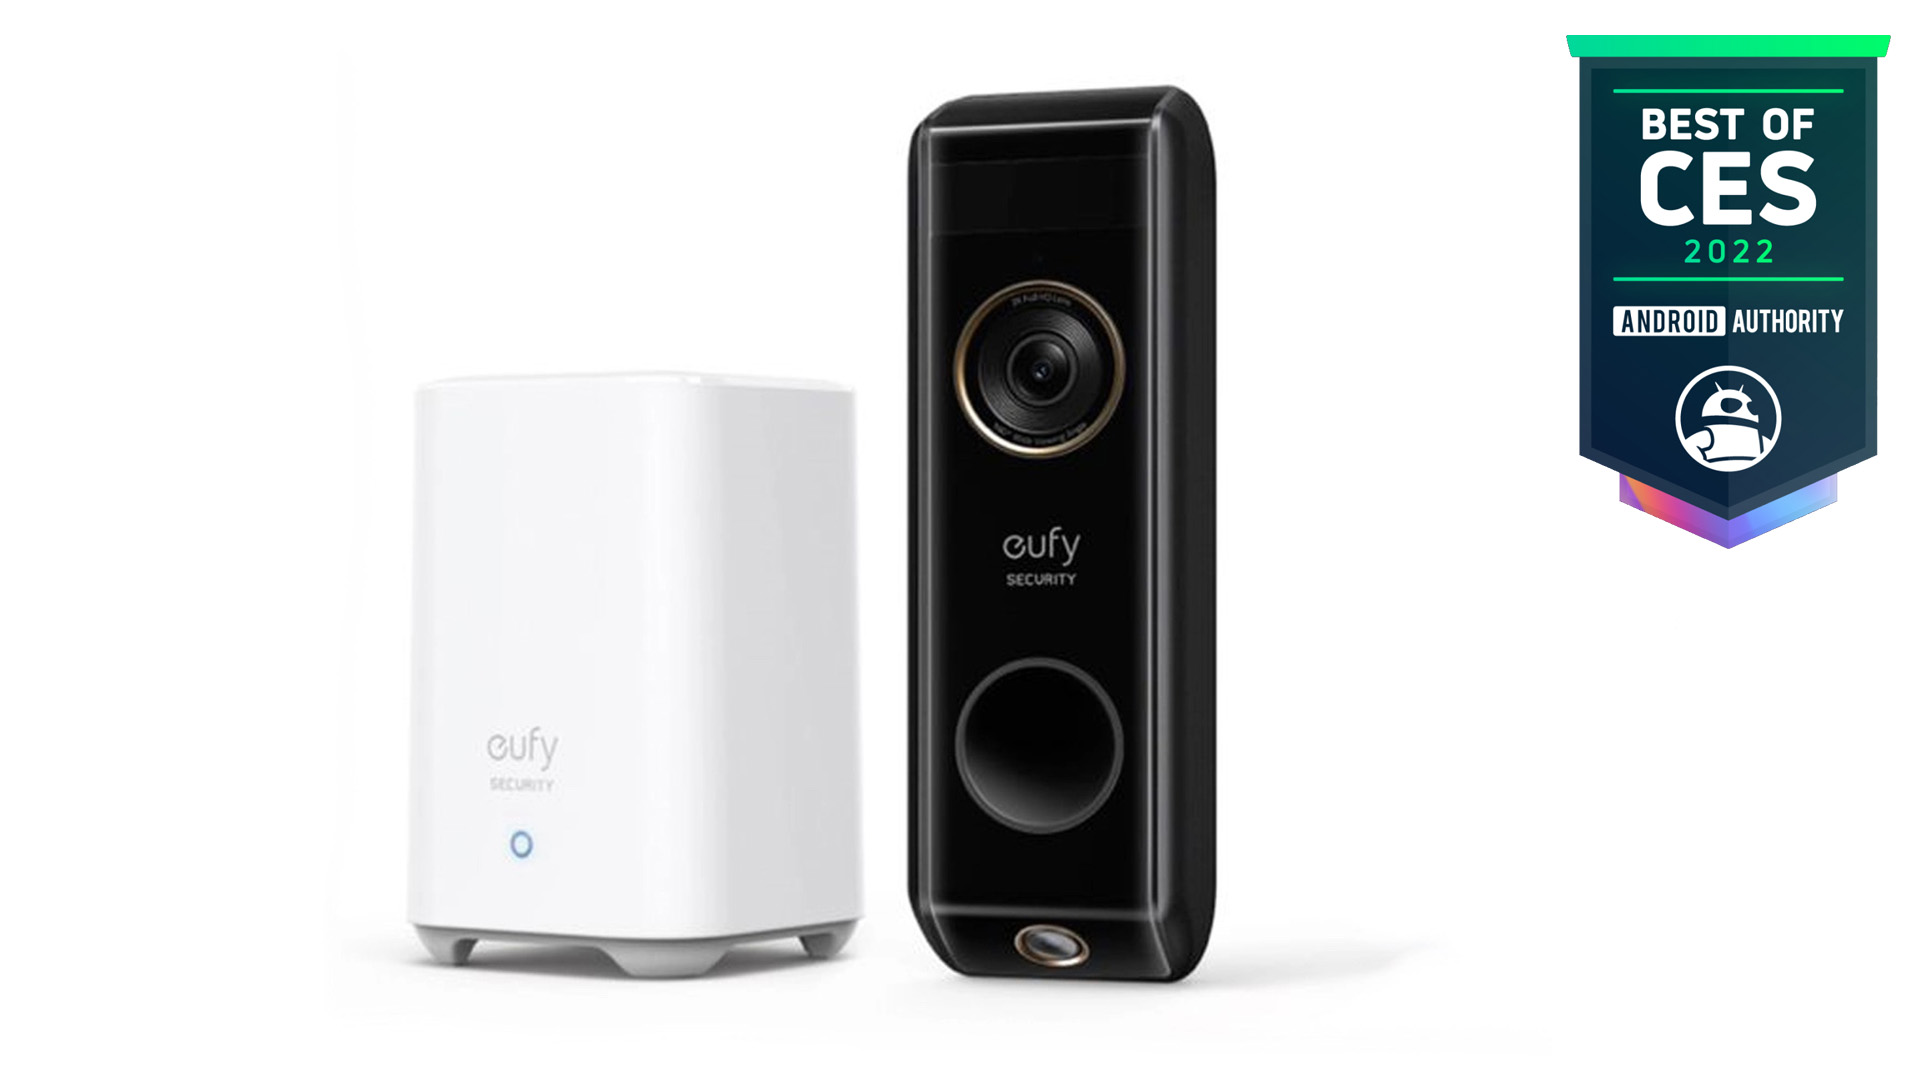 Eufy Security Video Doorbell Dual Android Authority Best of CES 2022 Award winner